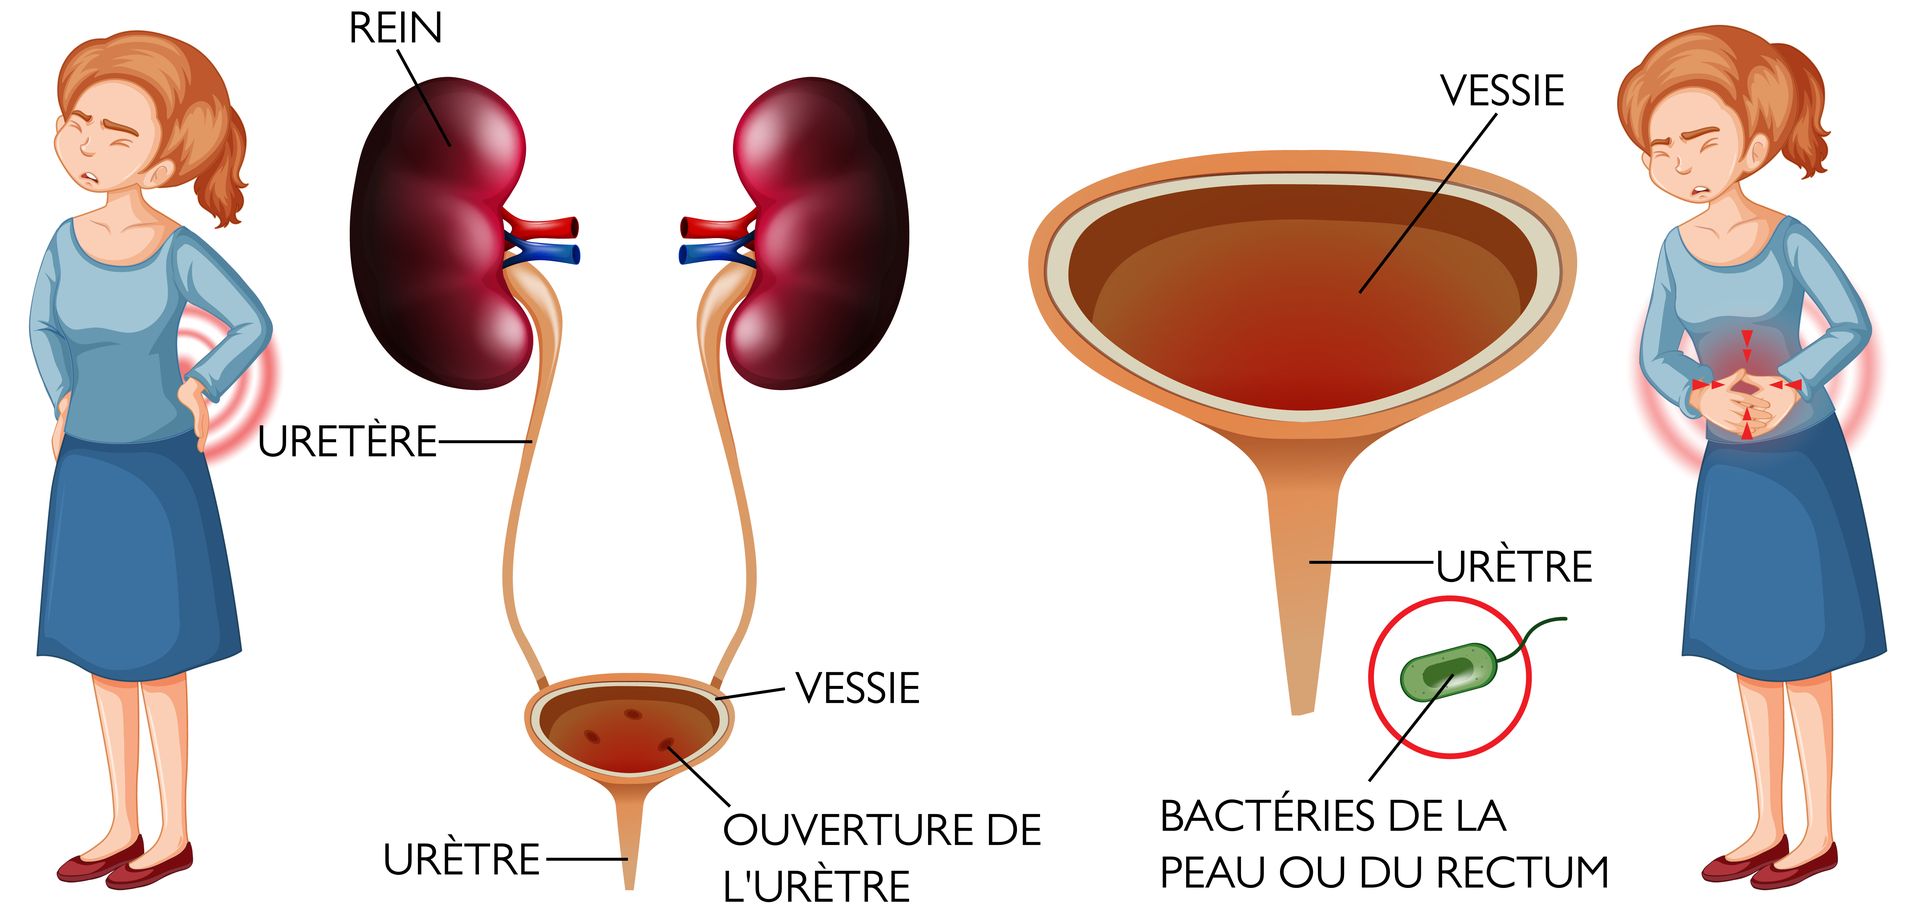 Cystite : Infection du systme urinaire